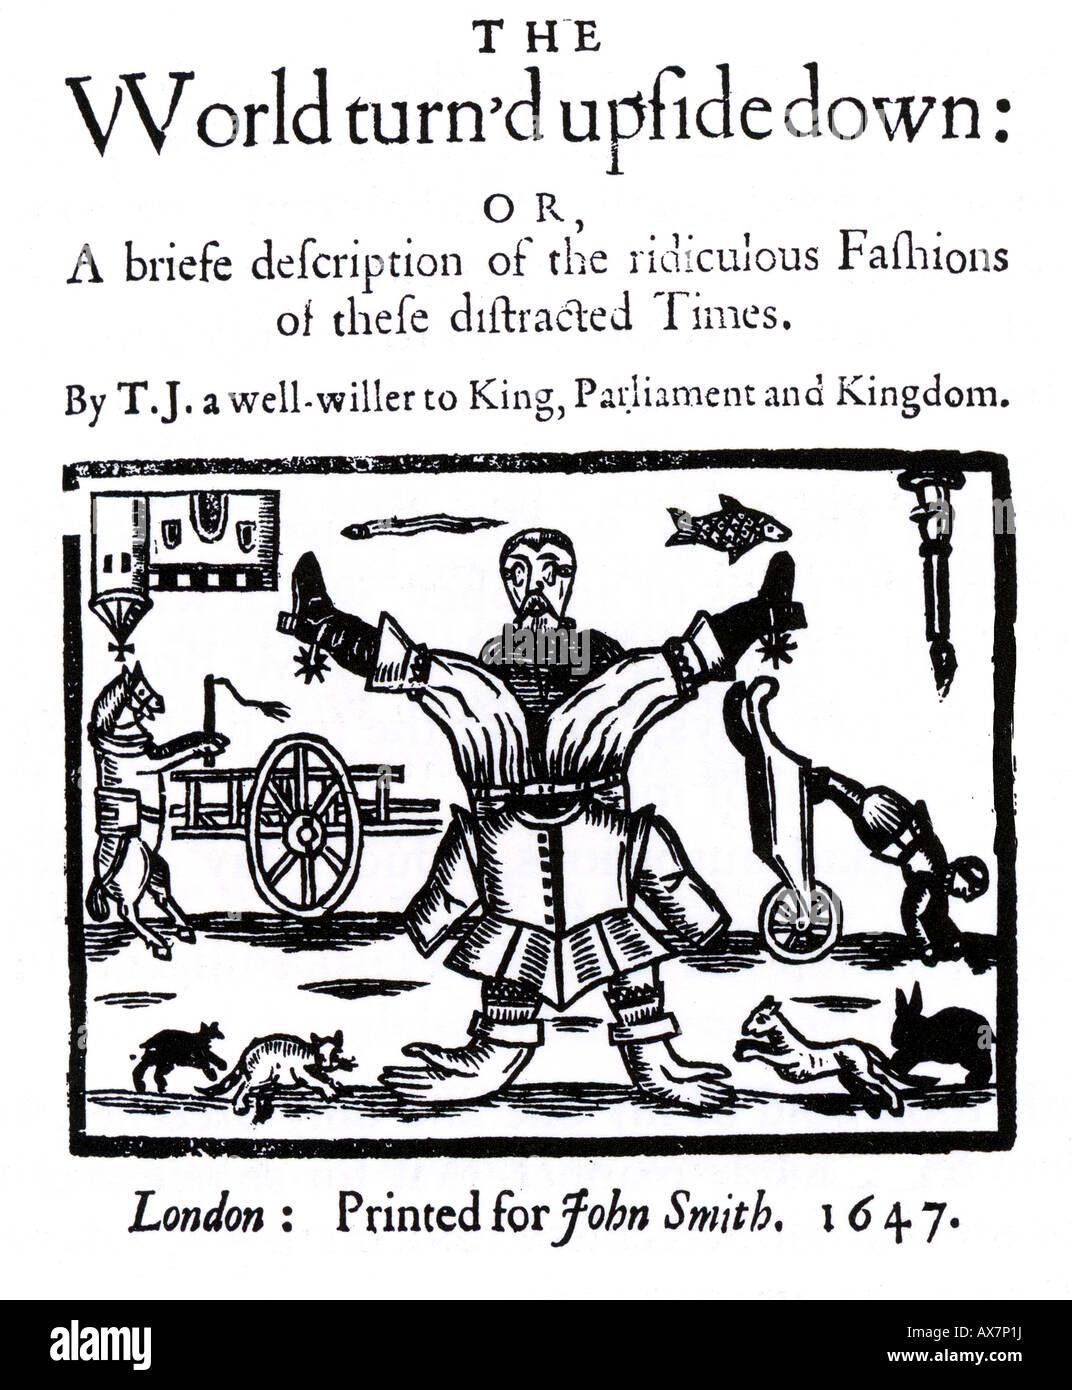 THE WORLD TURN D UPSIDE DOWN by John Taylor published in 1647 whose frontespiece shows the turmoil in both fashion and society Stock Photo